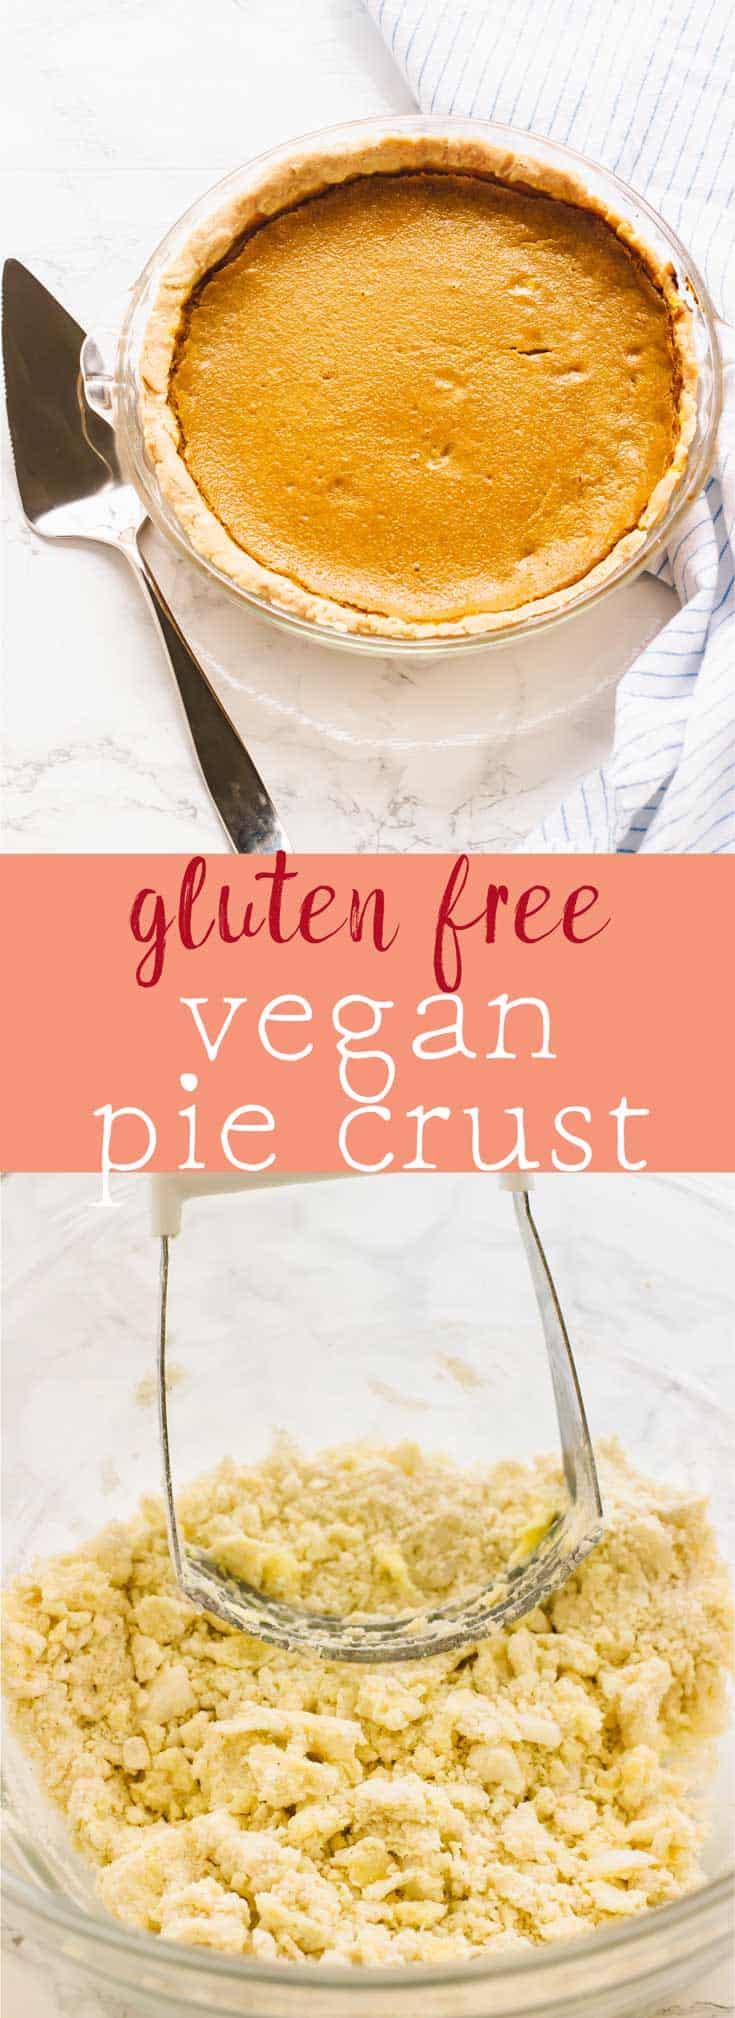 This Gluten Free Vegan Pie Crust is made with just 6 ingredients (including coconut oil) and works with ANY pie! All natural, easy ingredients and bakes perfectly into a light flaky crust!